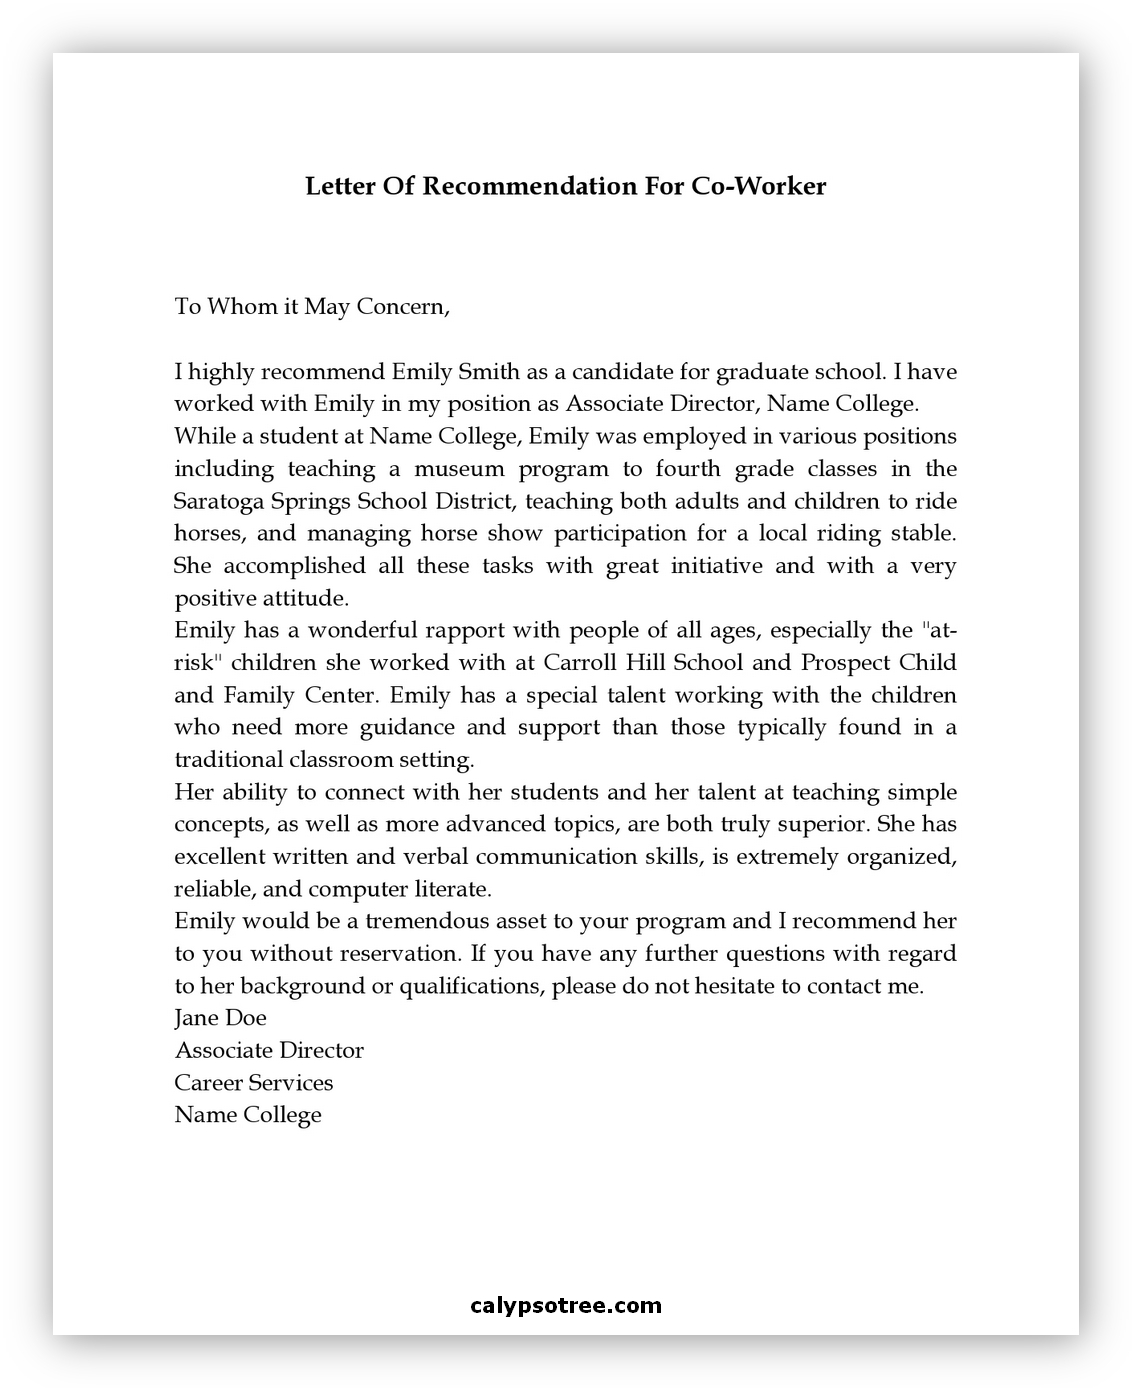 Letter of Recommendation for Coworker 04